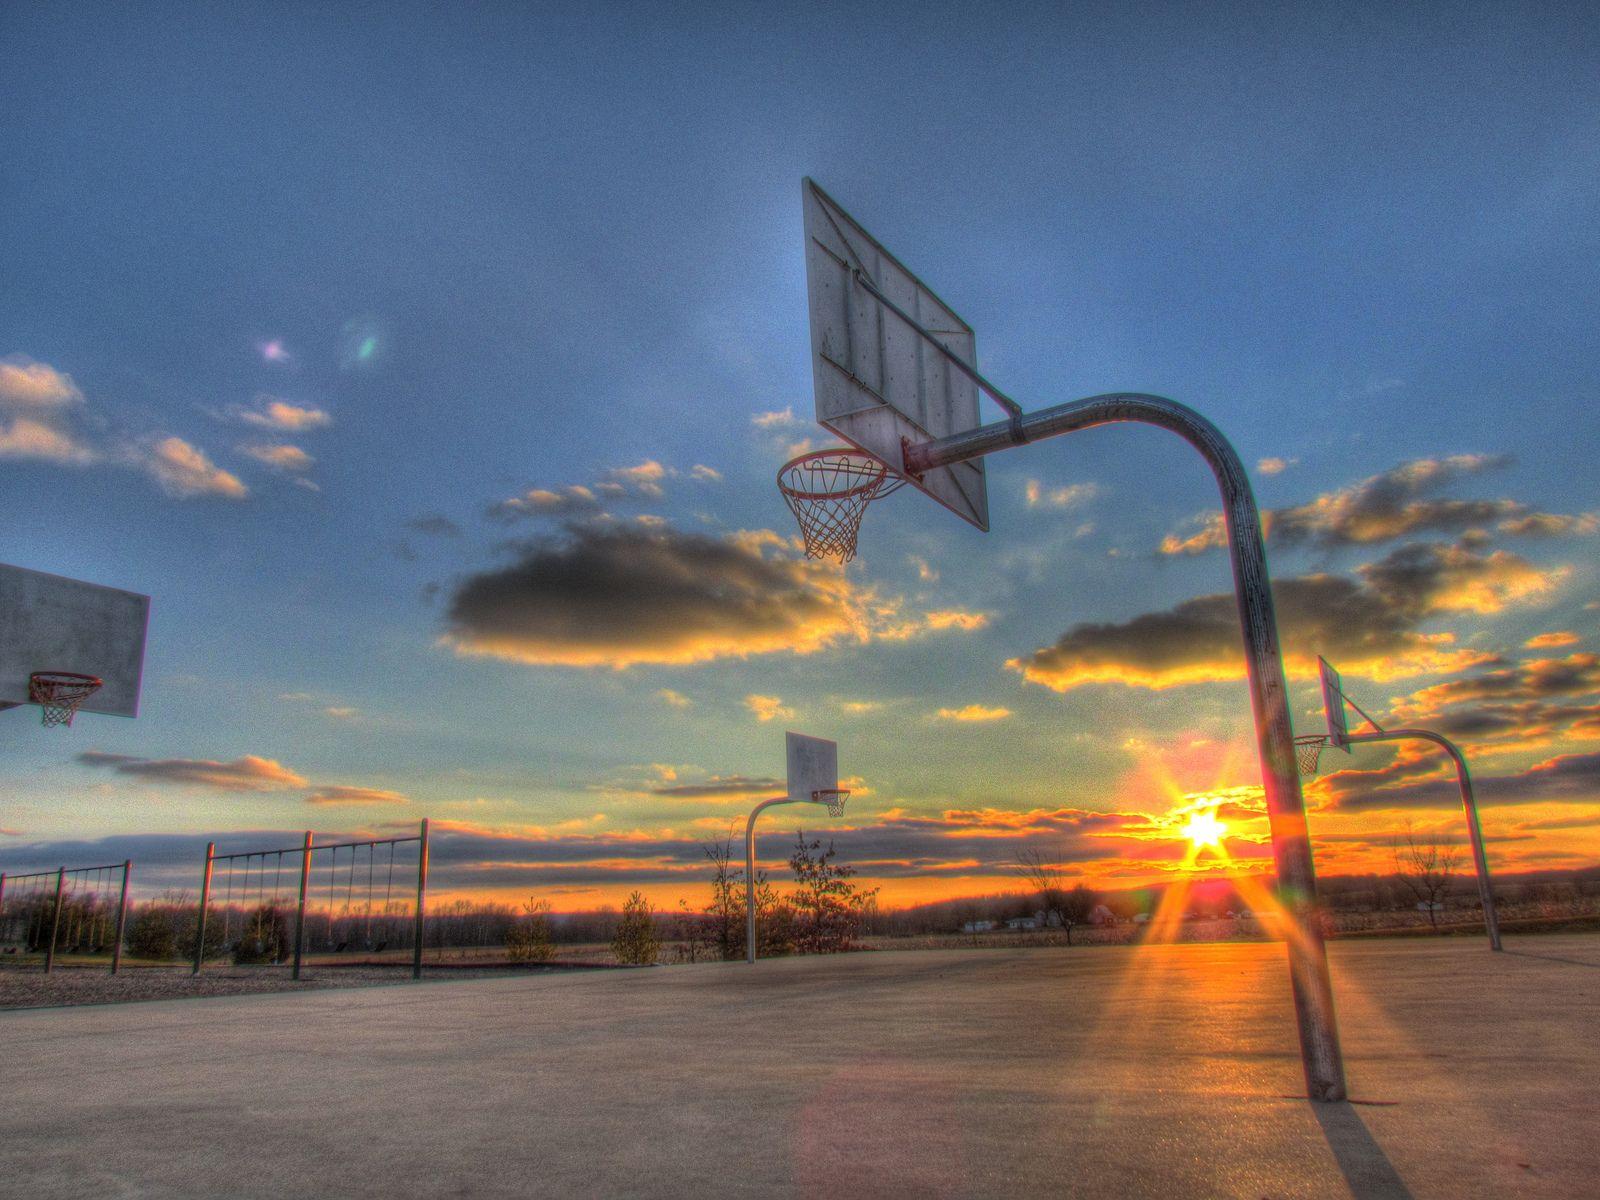 Hd Basketball Court Wallpaper For iPhone with HD Wallpaper